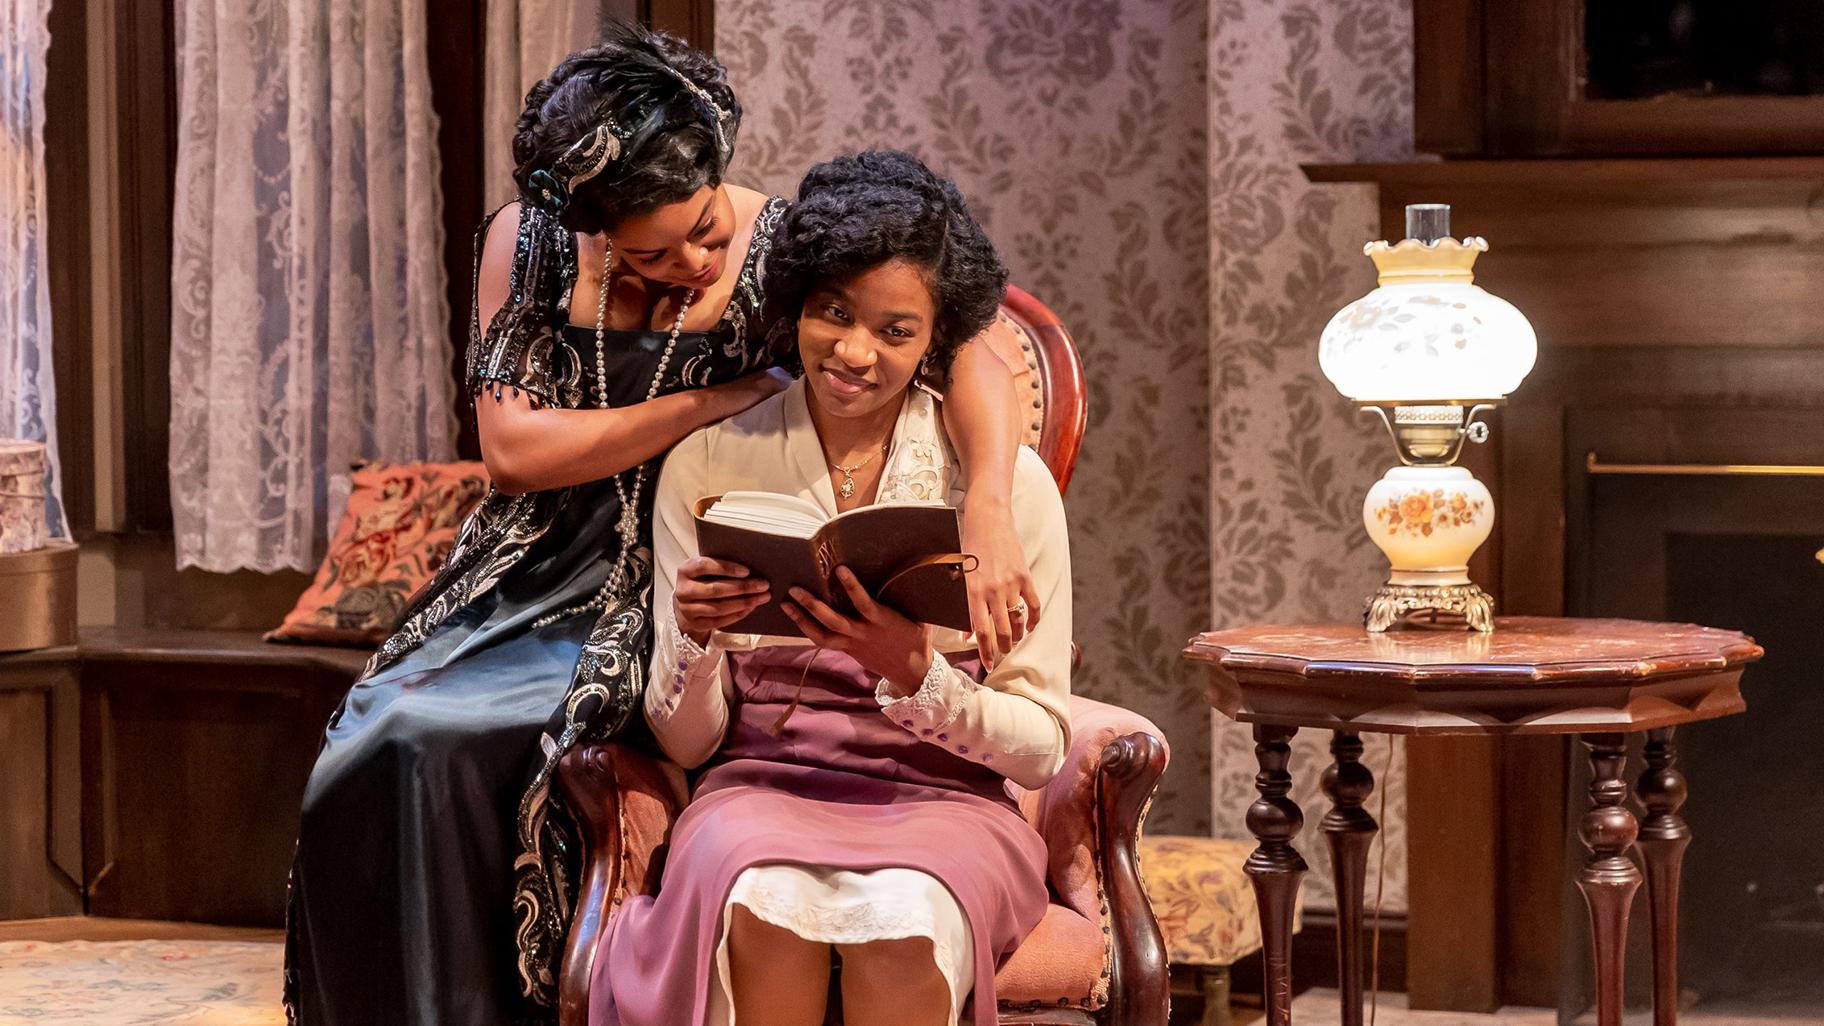 Annelle (Ayanna Bria Bakari, left) tries to tempt her sister Janet (Jaye Ladymore) into enjoying a night on the town in Tyla Abercrumbie’s new play “Relentless.” (Brett Beiner Photography)